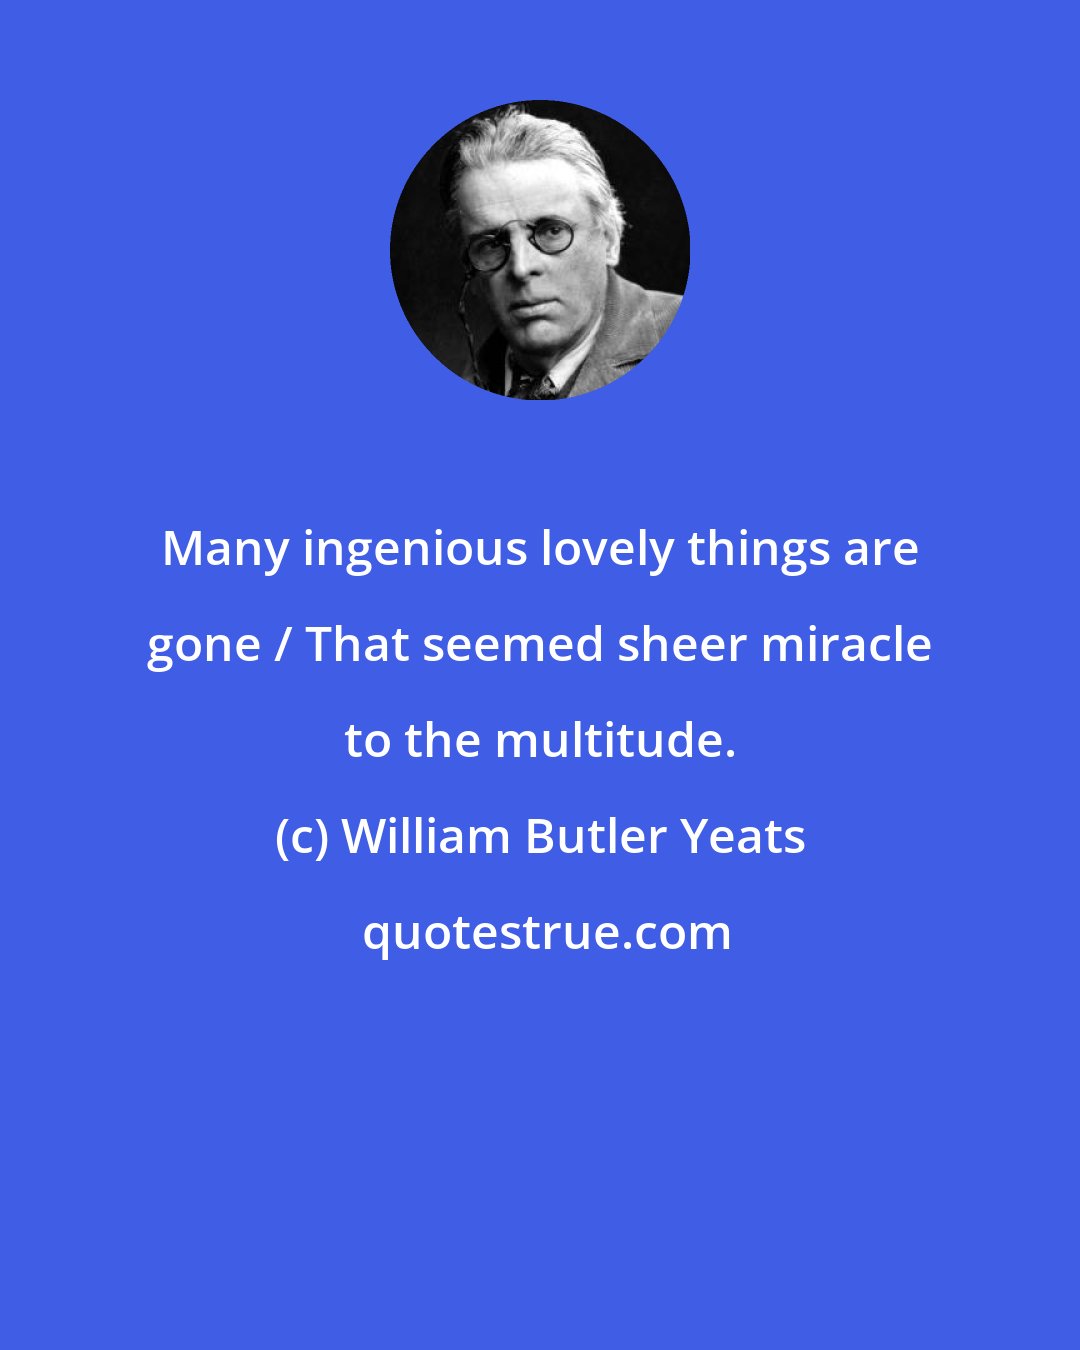 William Butler Yeats: Many ingenious lovely things are gone / That seemed sheer miracle to the multitude.